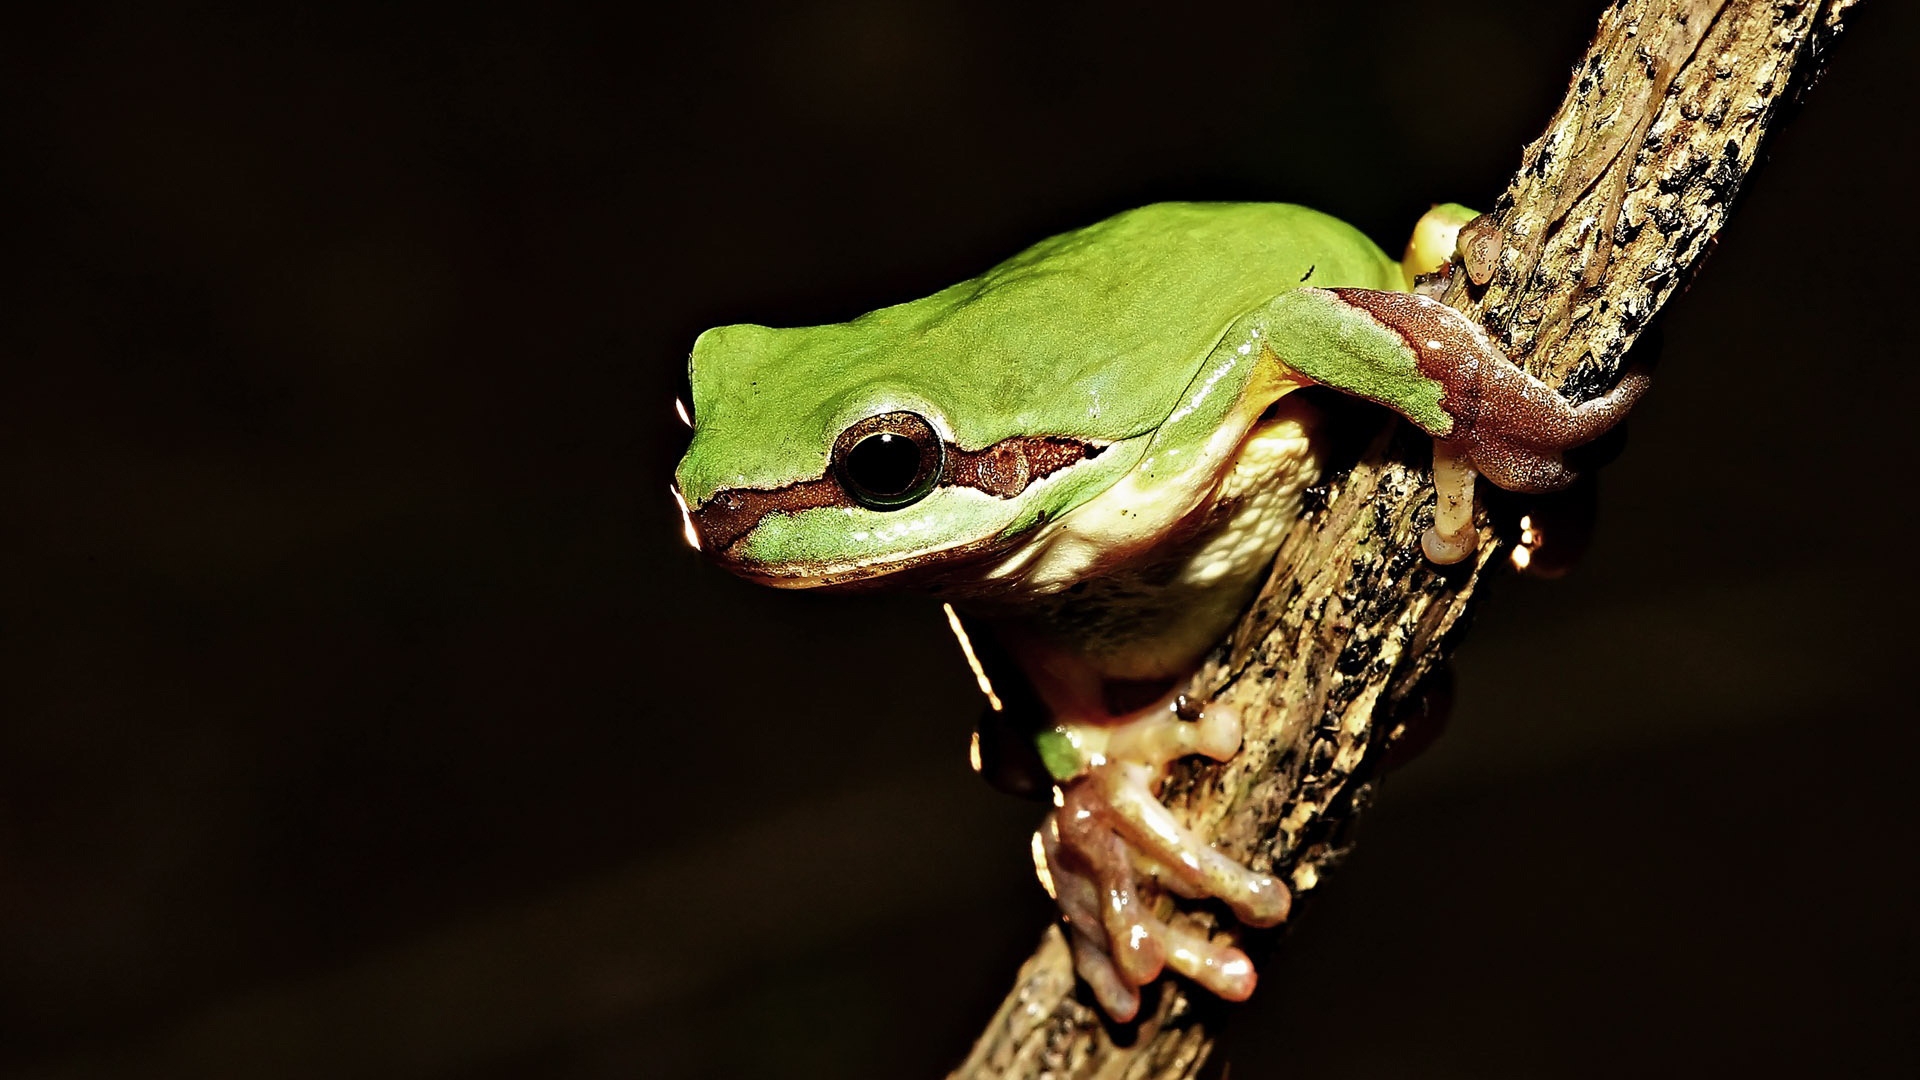 Frog on Tree for 1920 x 1080 HDTV 1080p resolution